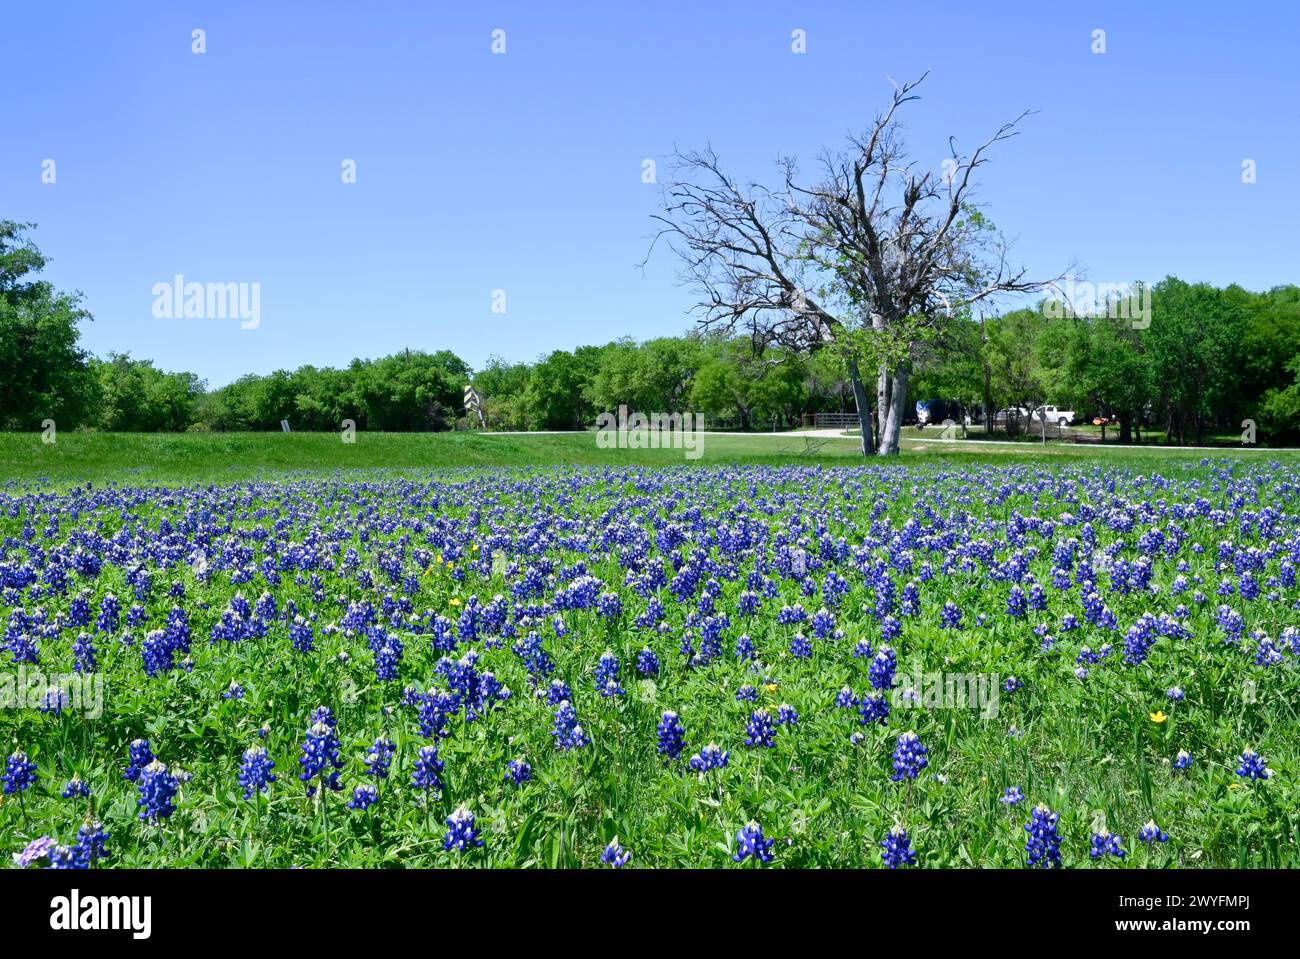 A field covered in green grass and a blanket of blooming Bluebonnet flowers on a sunny, Spring day in Texas. Stock Photo